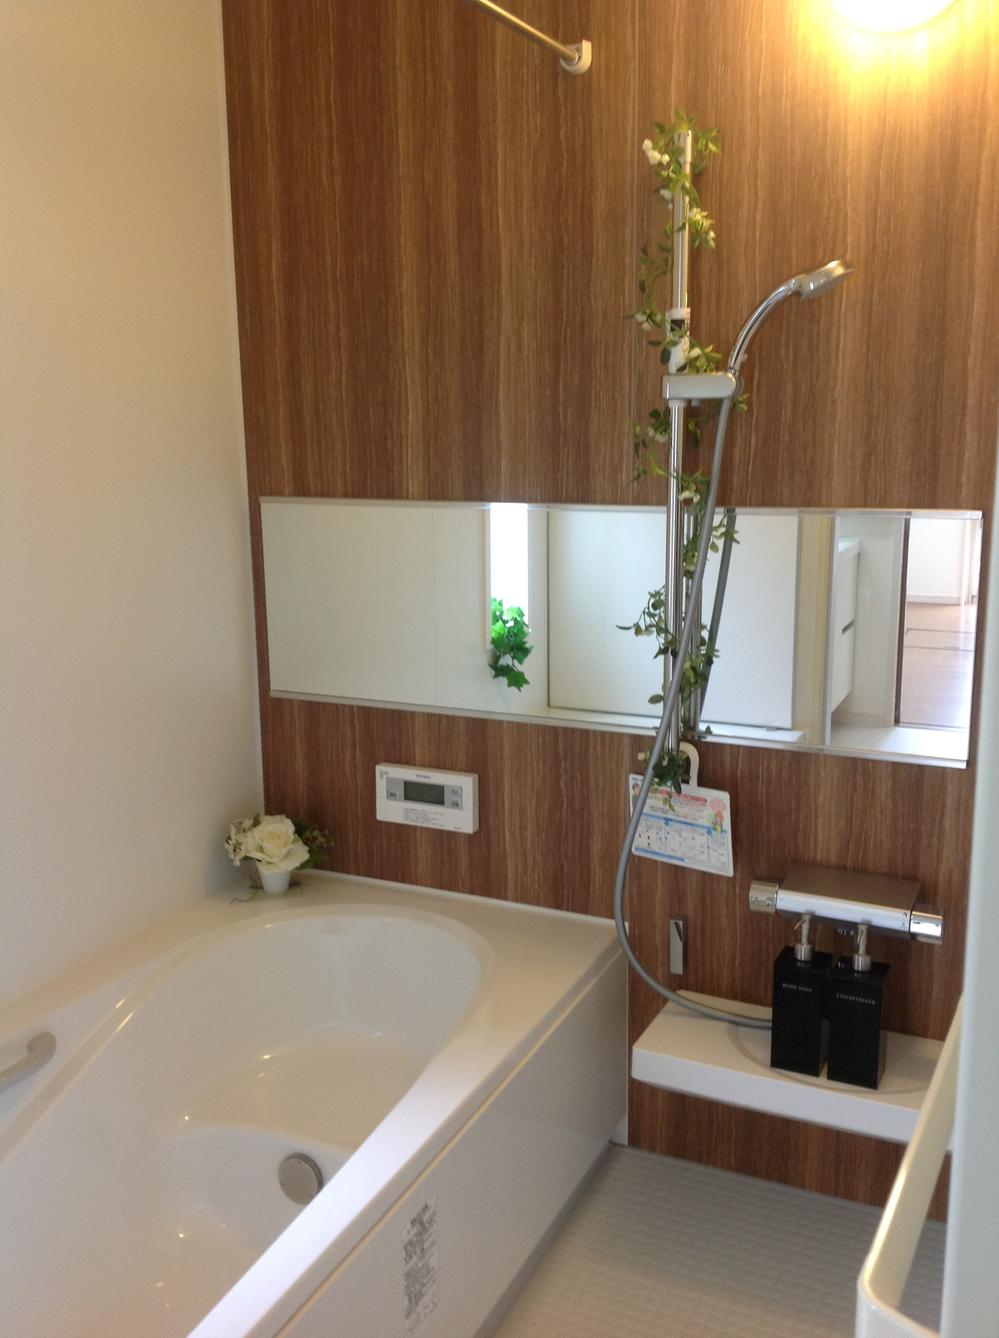 Other Equipment. Spacious 1 tsubo! System bathroom of the latest model